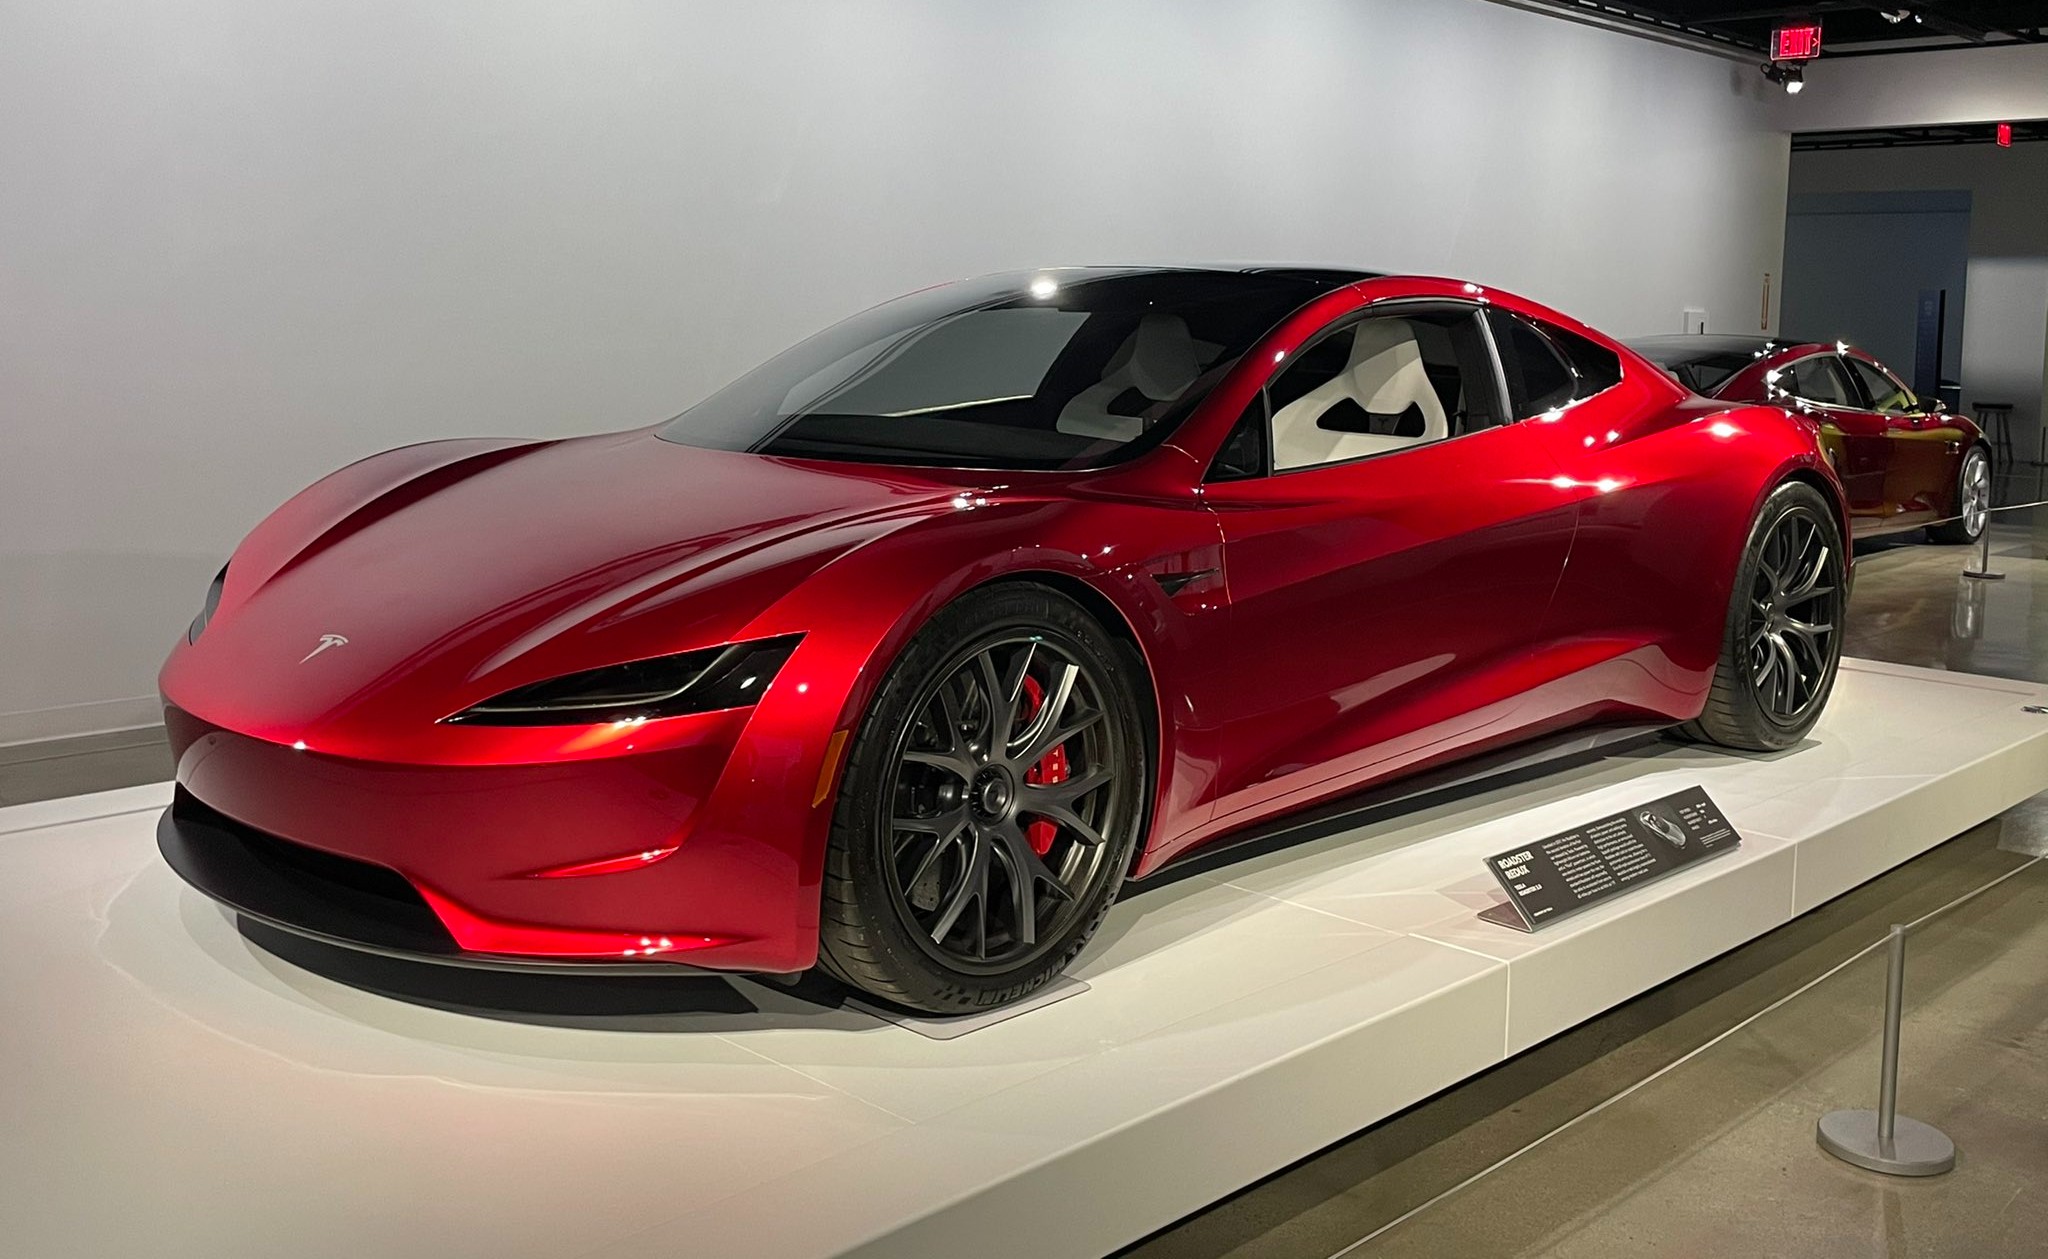 Tesla Roadster SpaceX Package's shocking 0-60 mph time teased in museum info